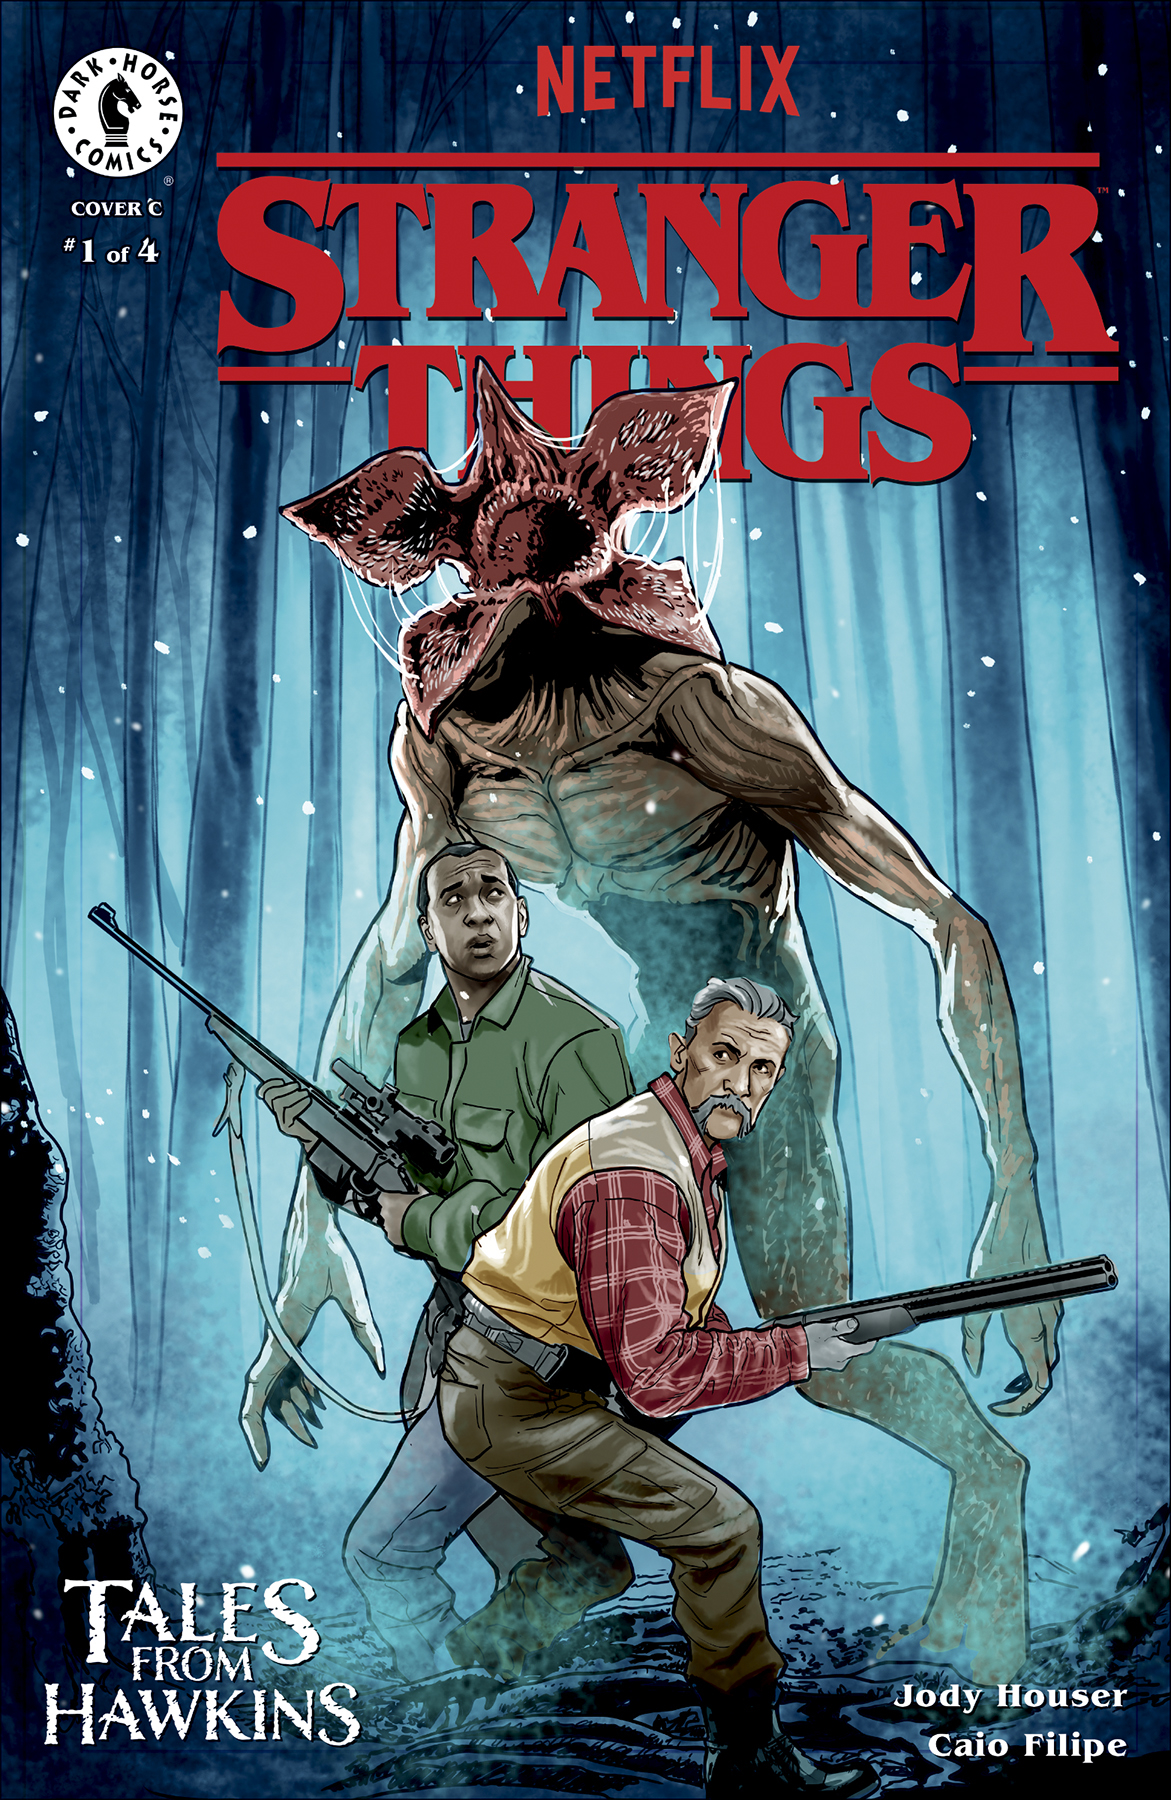 Stranger Things: Tales From Hawkins #1 Cover C Galindo (Of 4)